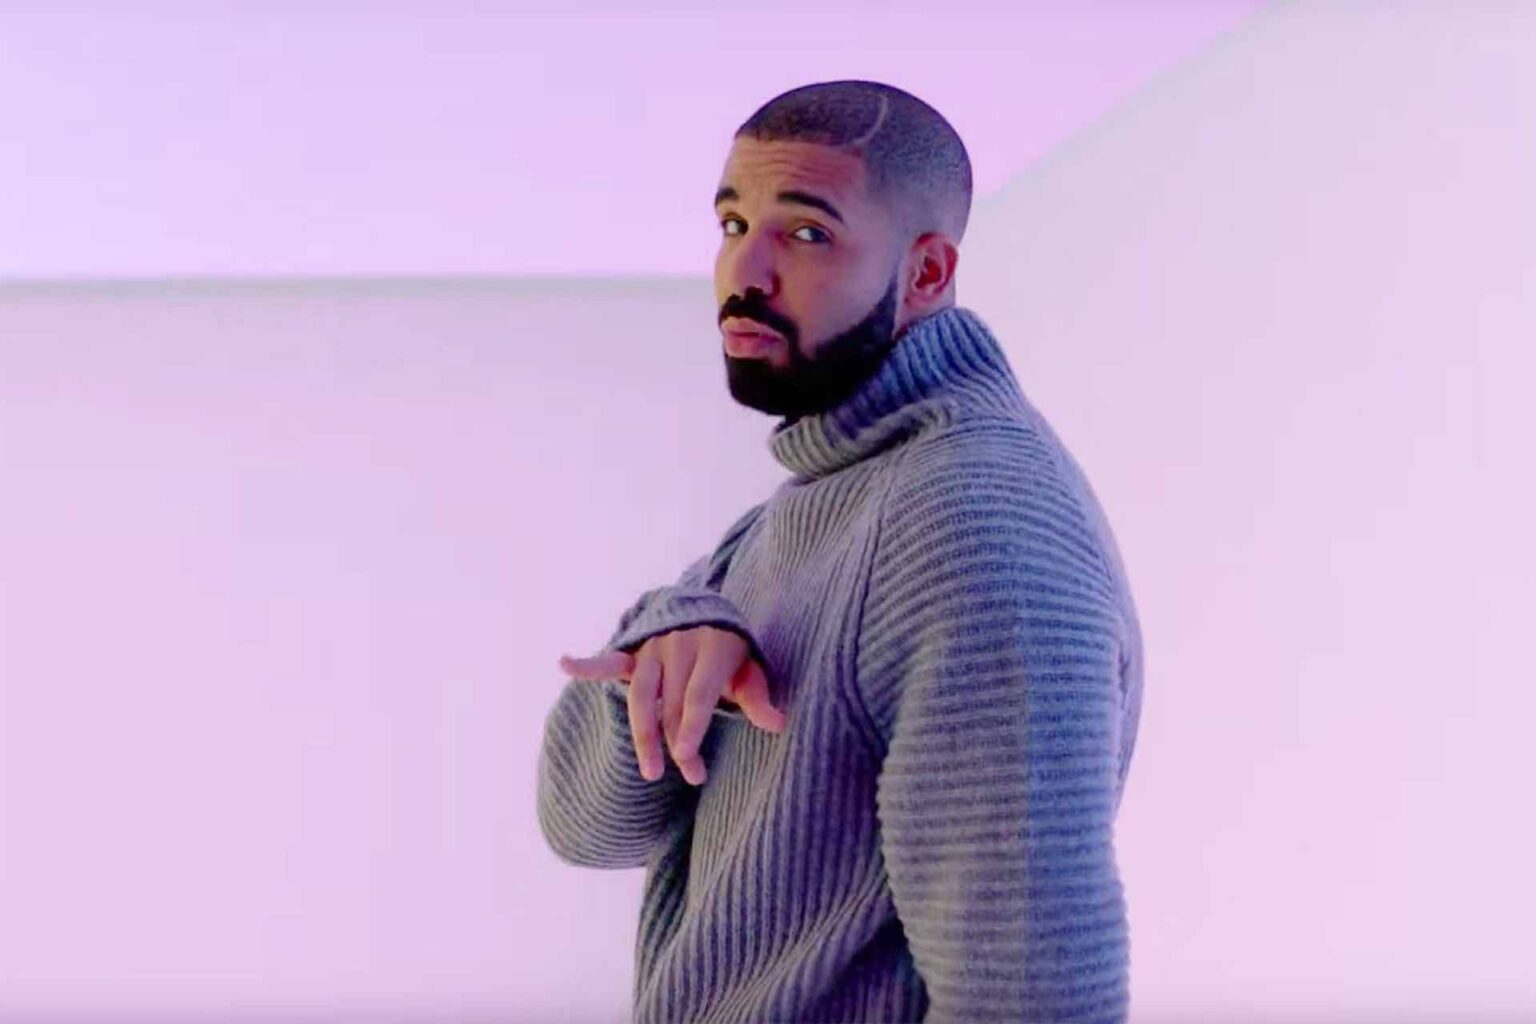 Not enough Drake memes for your liking? Take a look at these gems cut from the Drake and Justin Bieber "Popstar" music video.